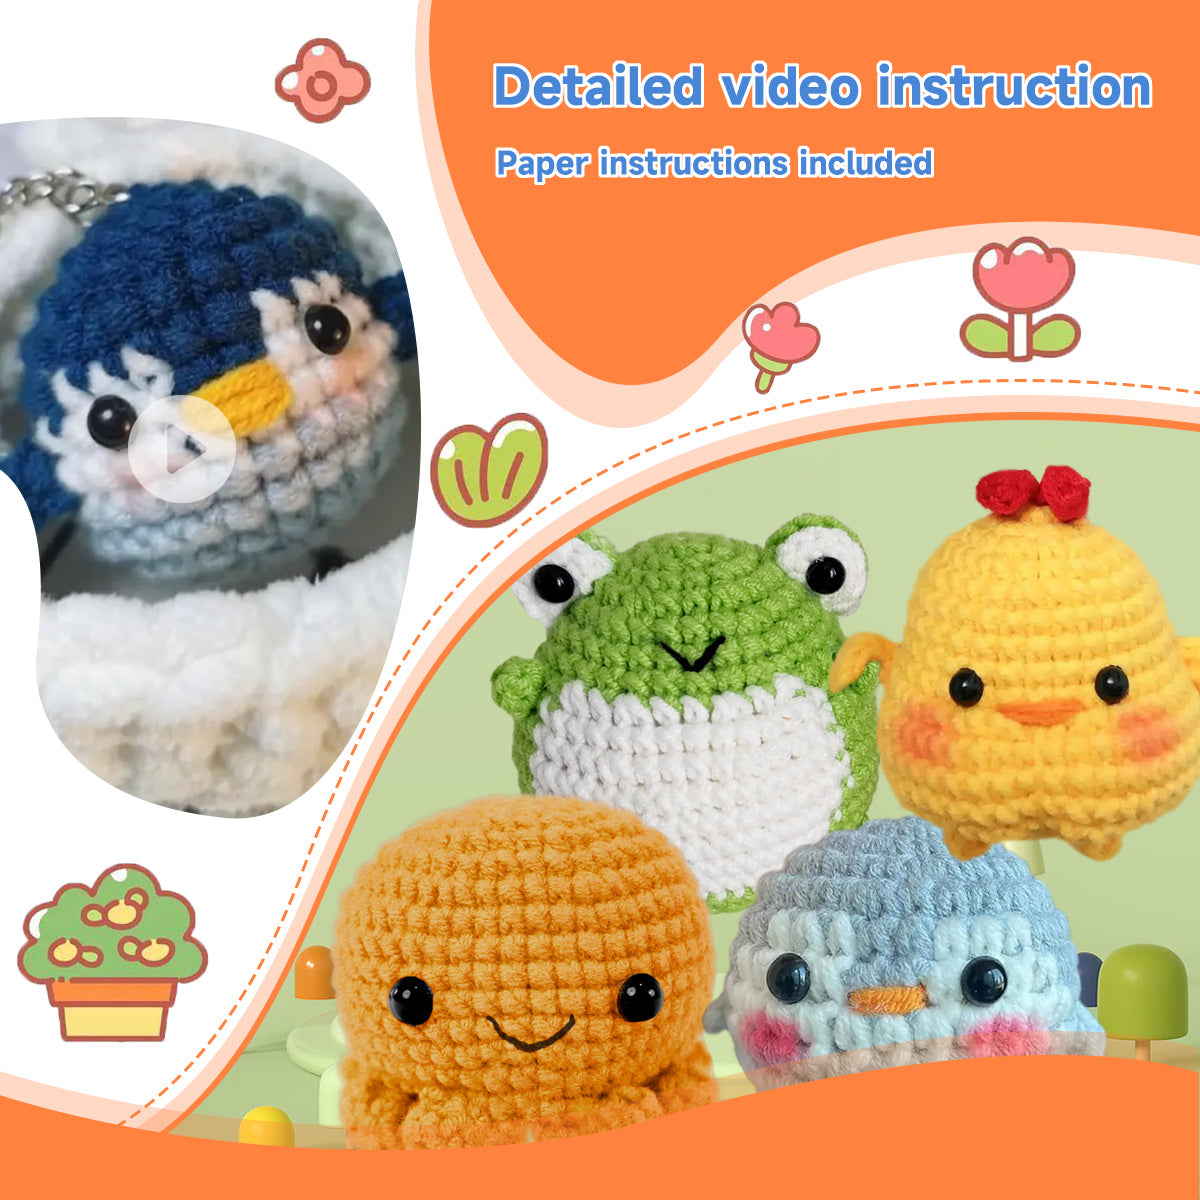 Crochet Kit for Beginners,4 PCS Animals Crochet Kit with Step-by-Step Video  Tutorials, DIY Crochet Kit for Beginners Includes Yarns, Eyes, Stuffing